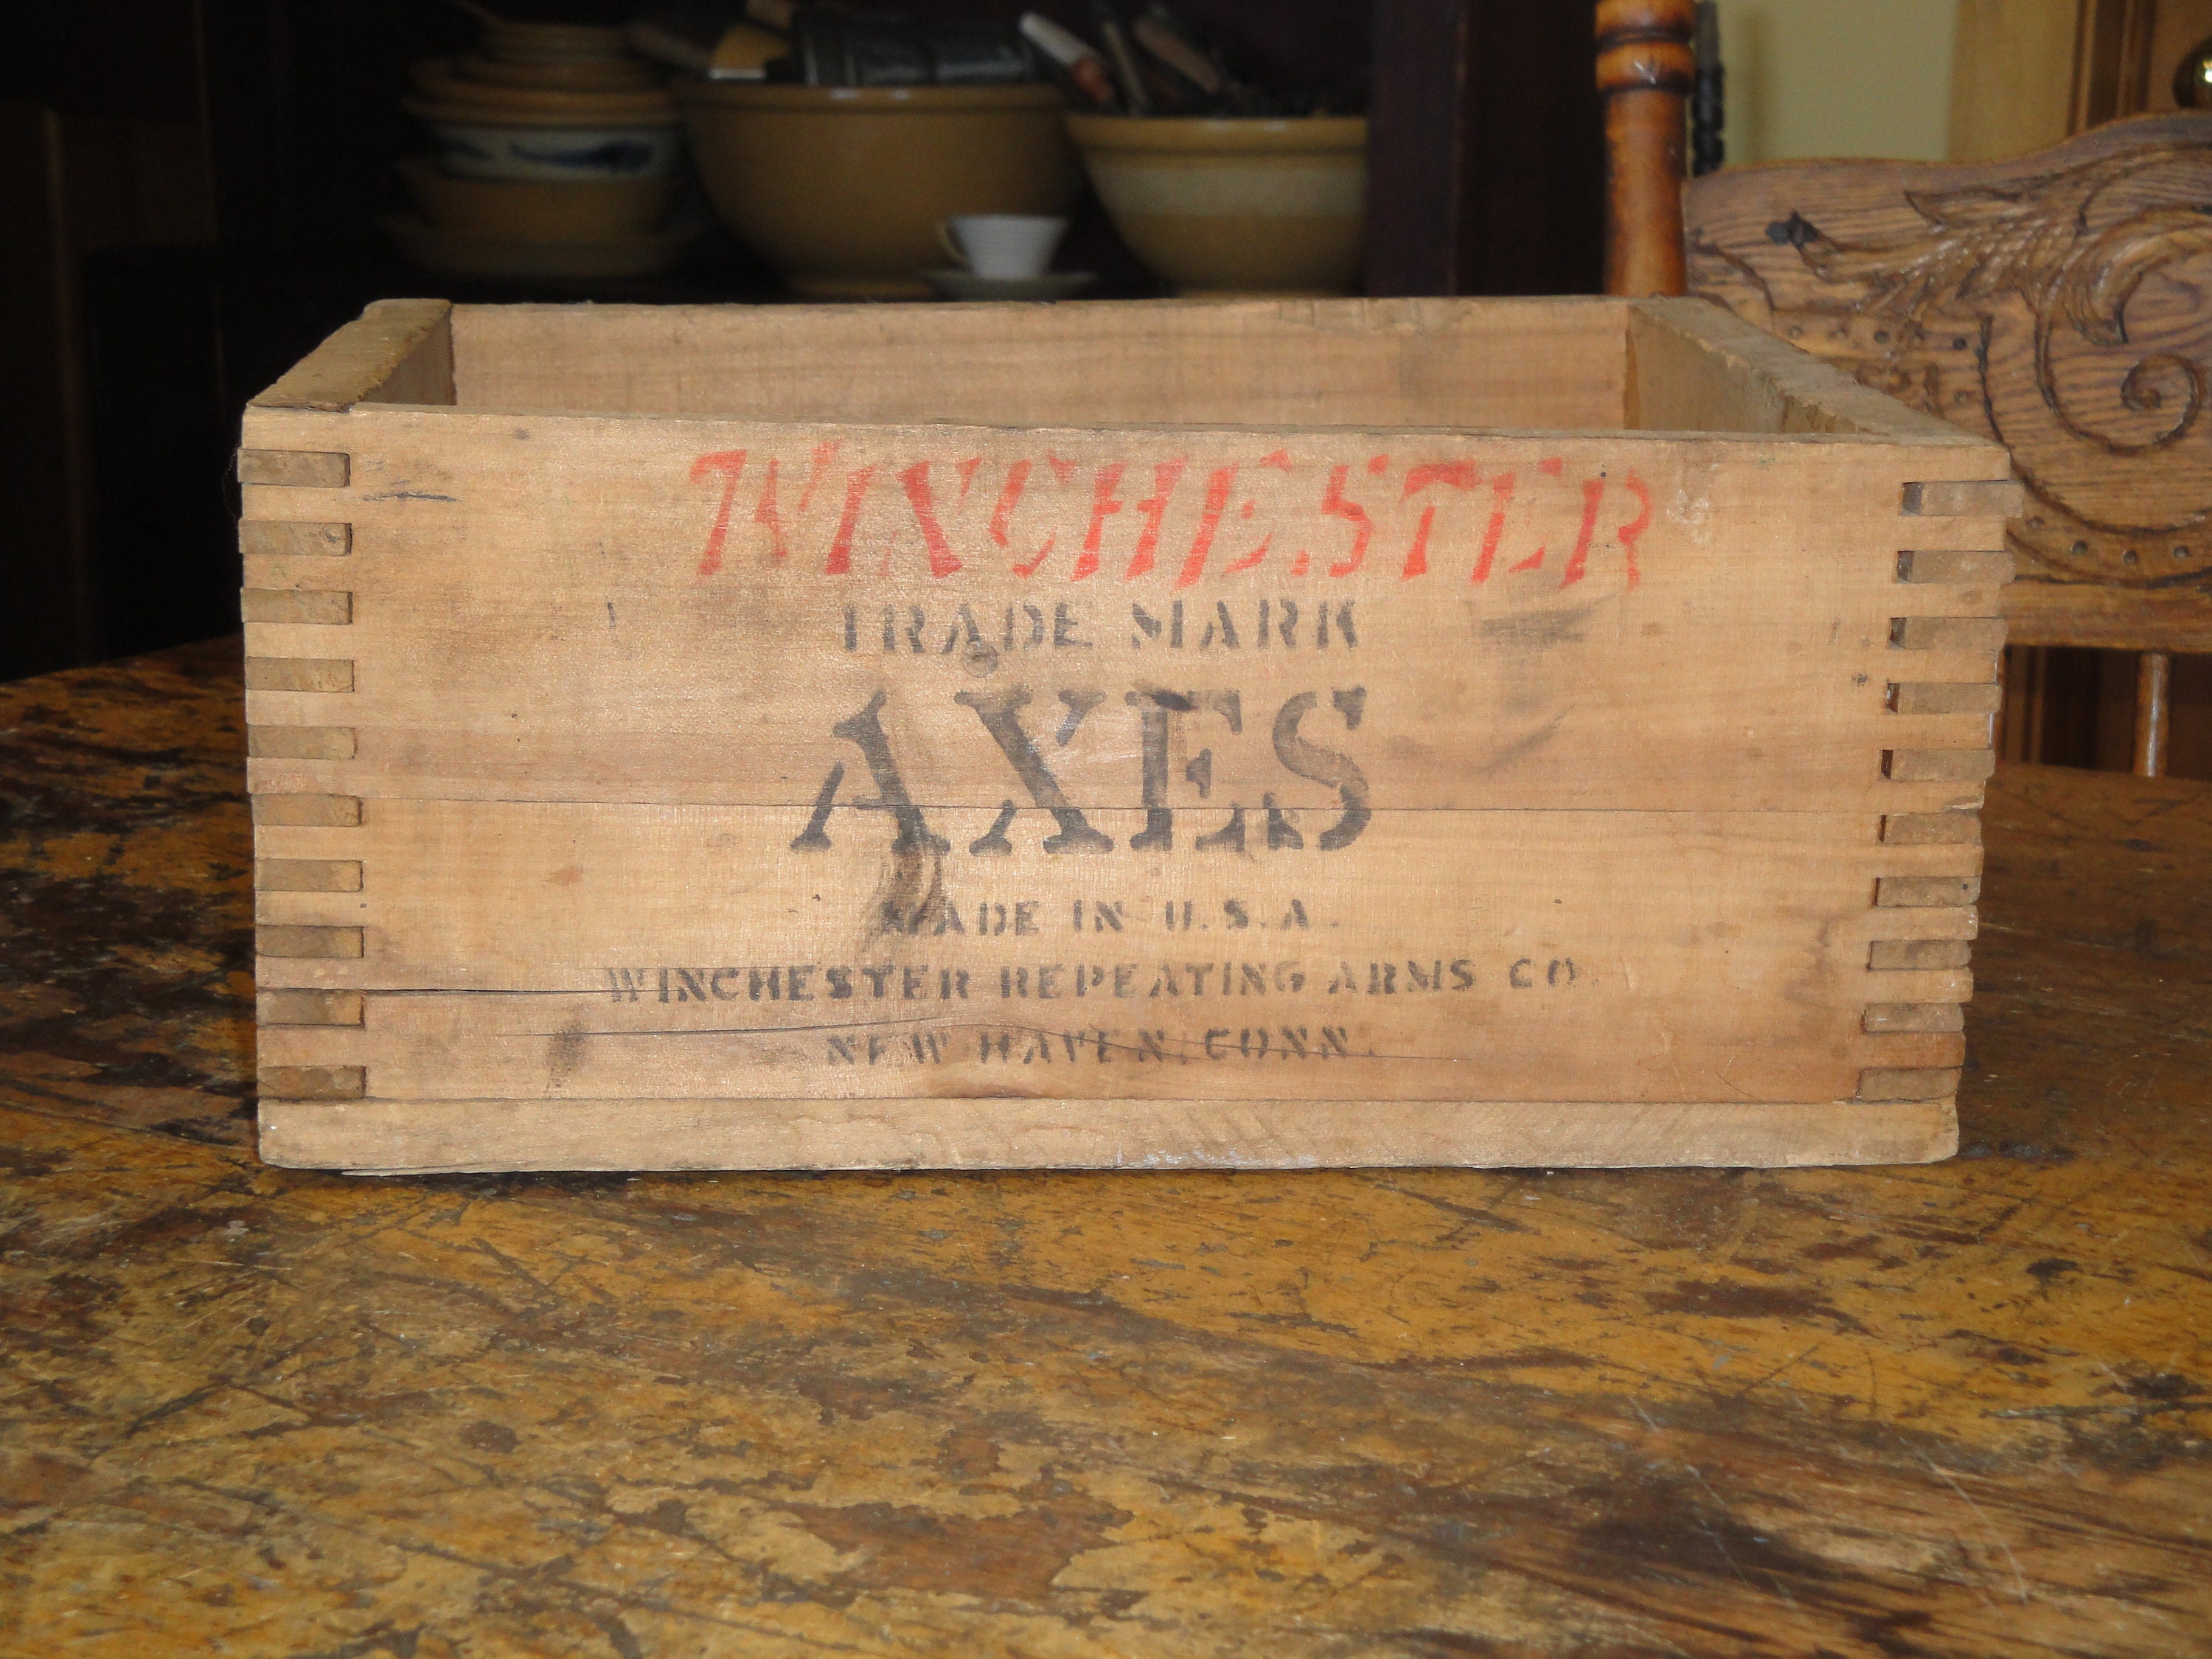  Winchester Wooden Ammo Box : Sports & Outdoors